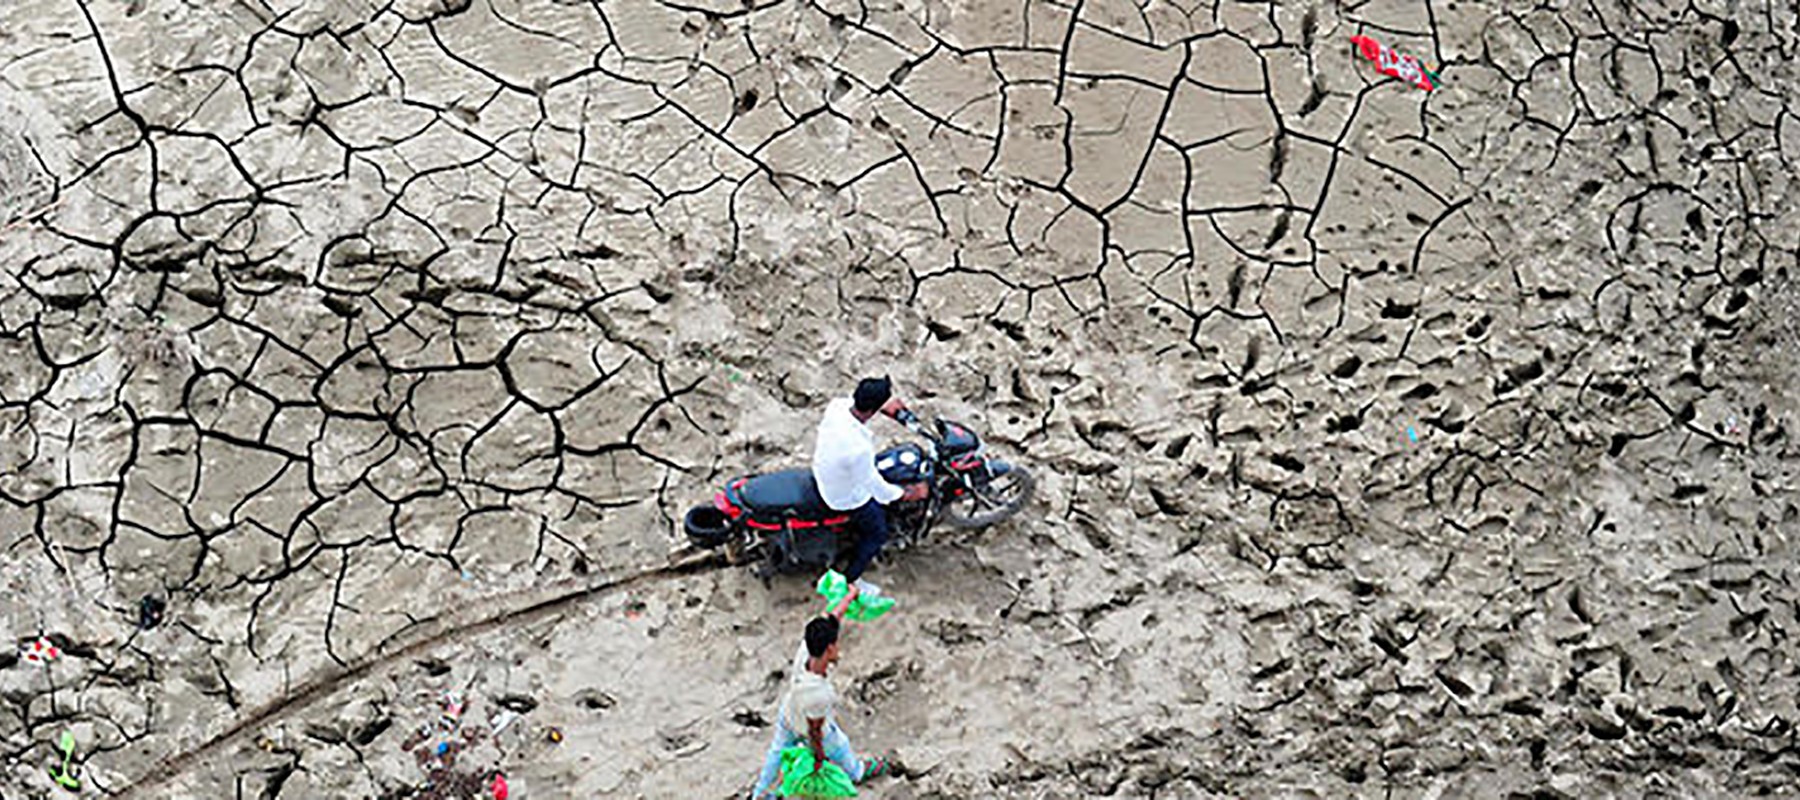 Motorbike and man carrying water cans walking on dry, cracked soil